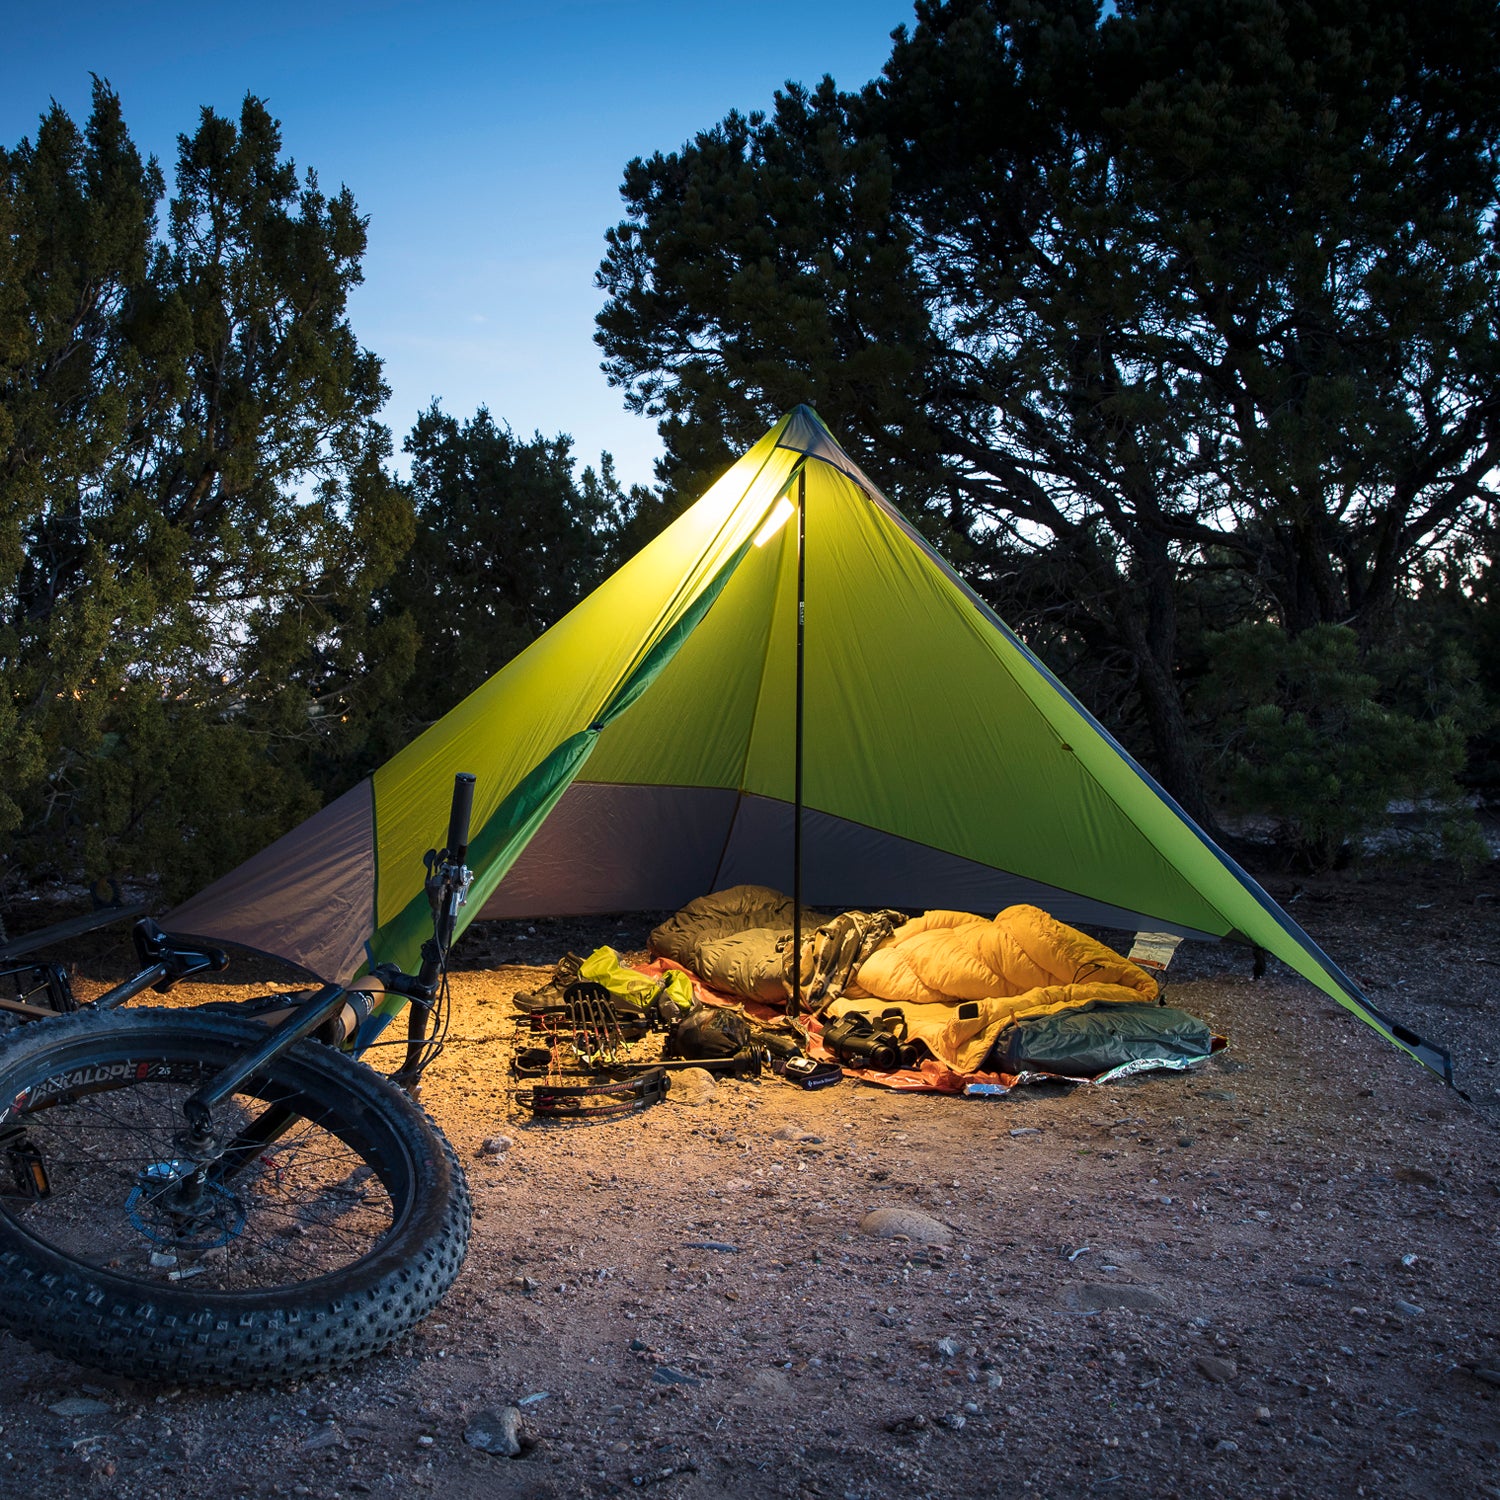 Tested: Nemo's New Bikepacking Camping Gear